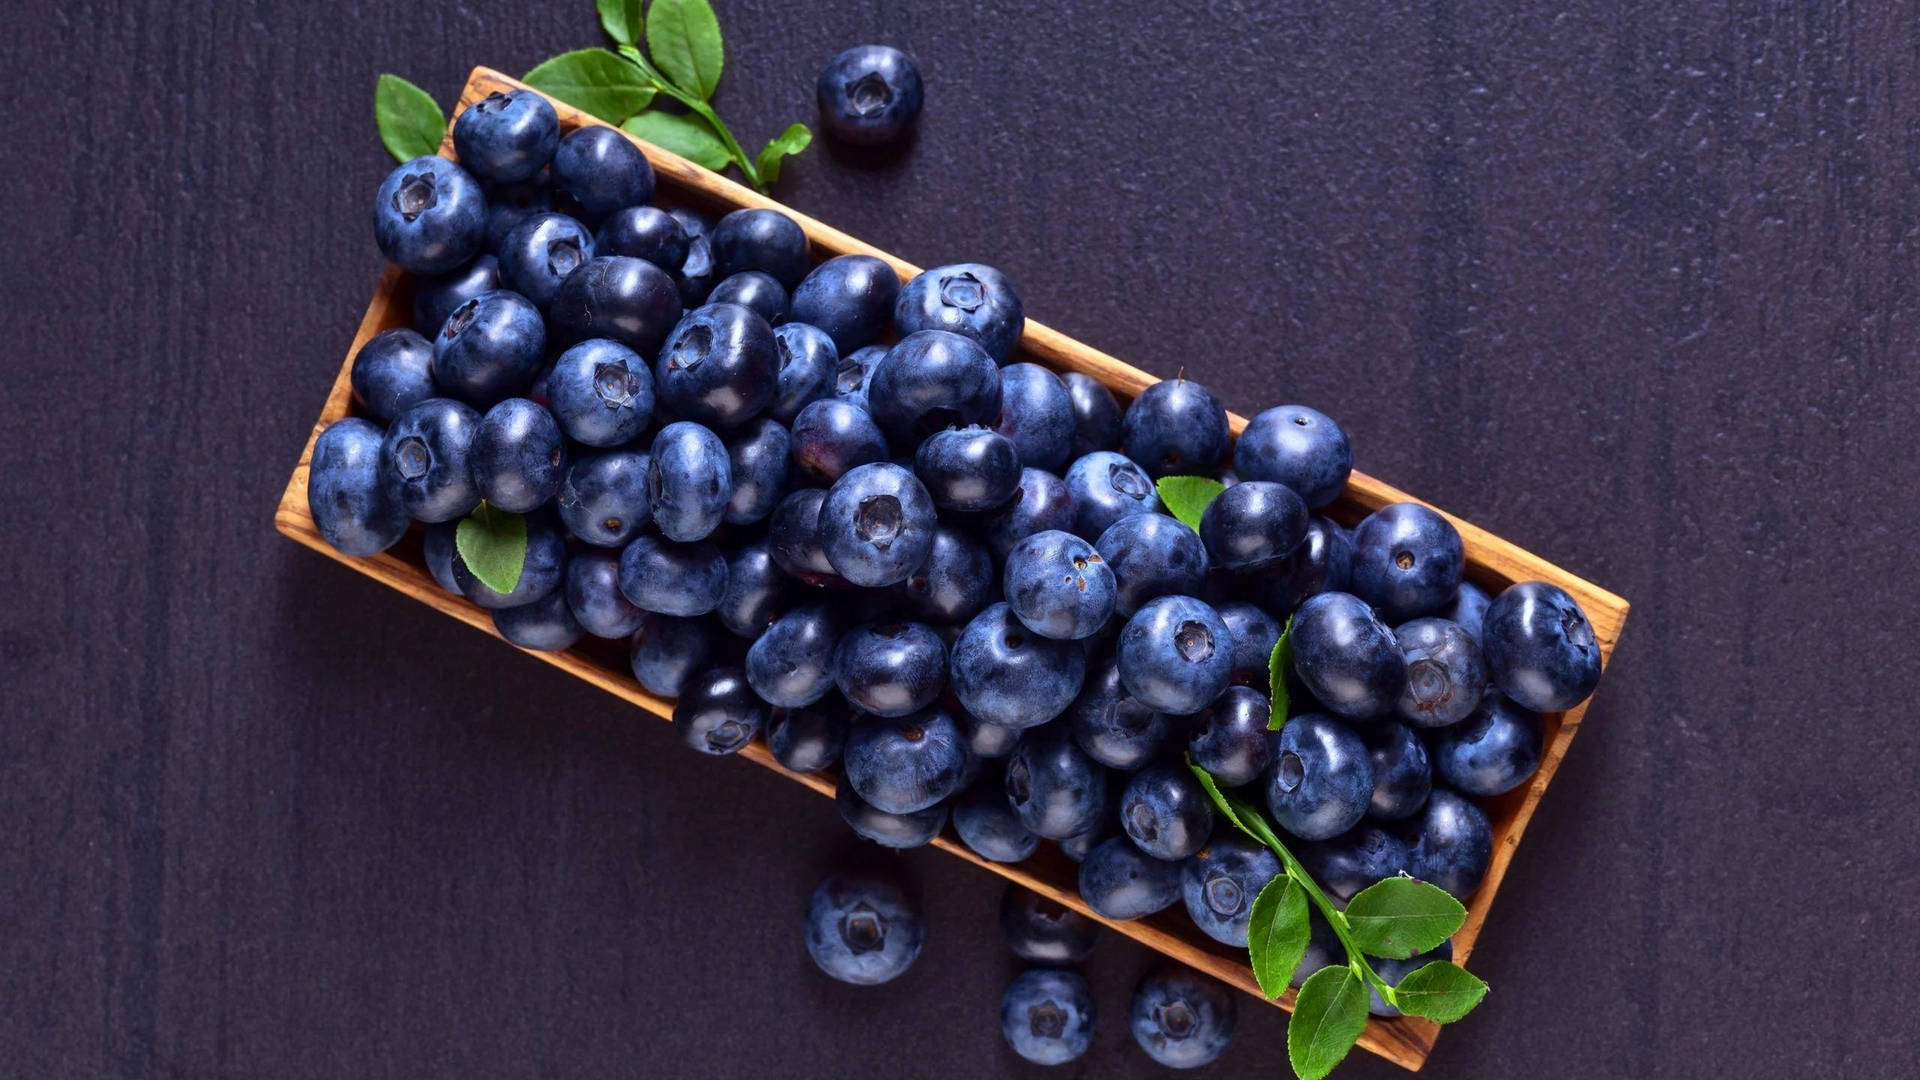 Wooden Tray With Blueberries Wallpaper